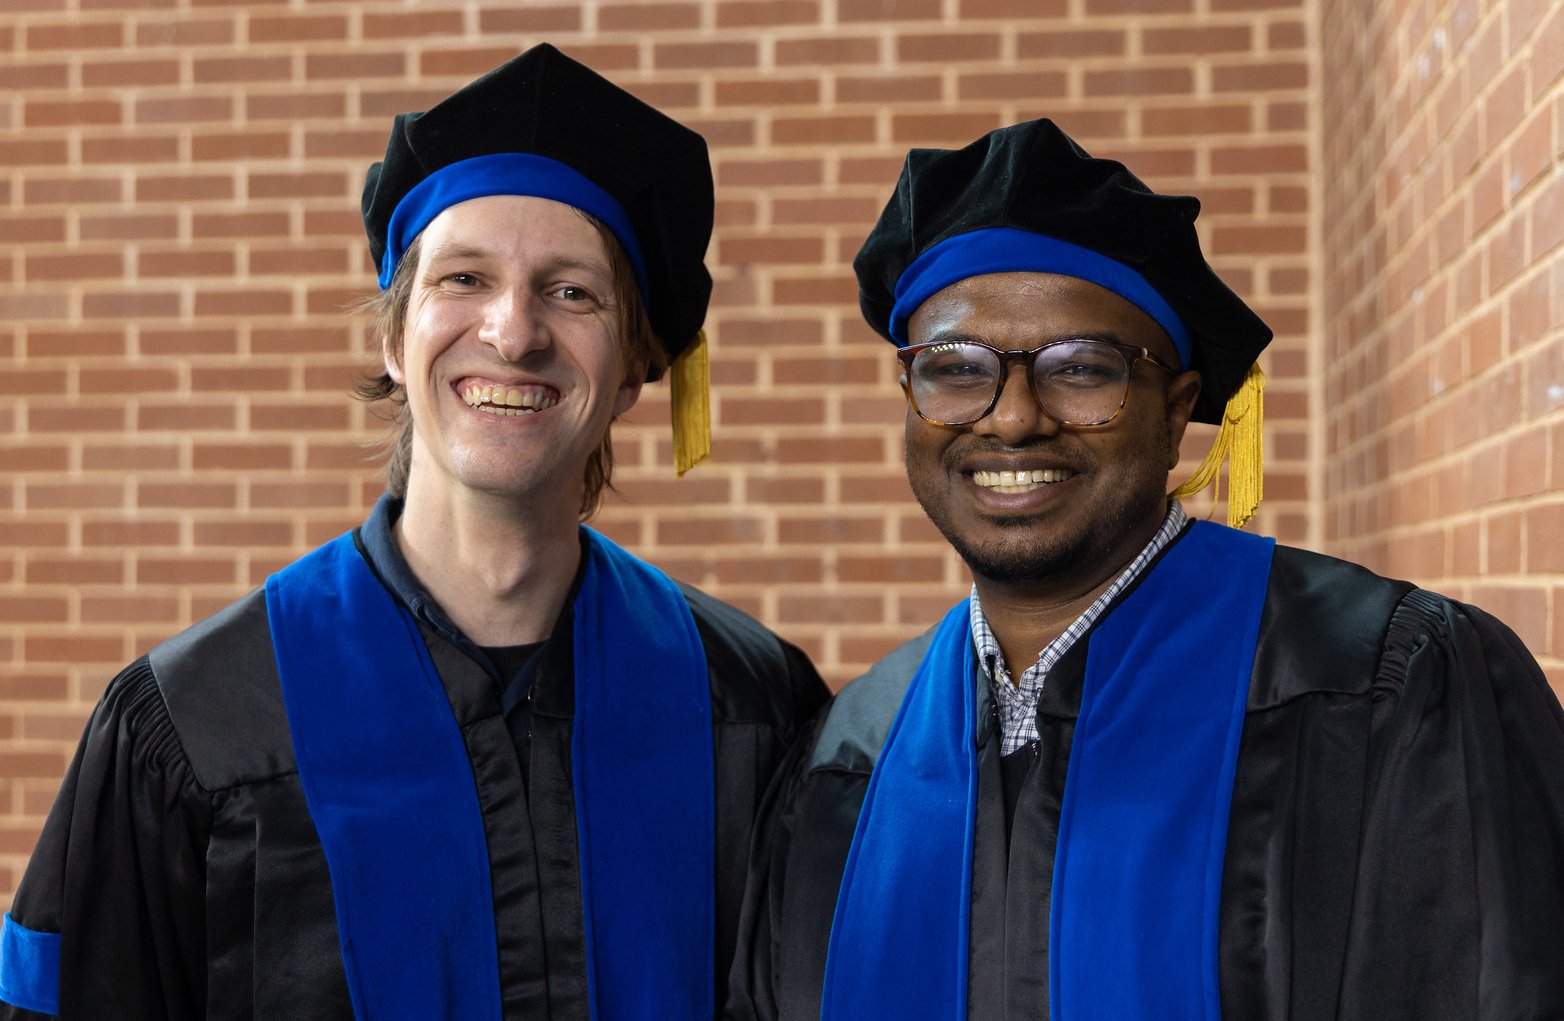 GSBS graduates Darlan Conterno Minussi, PhD, and Vinay Nair, PhD, are all smiles after receiving their doctoral degrees.